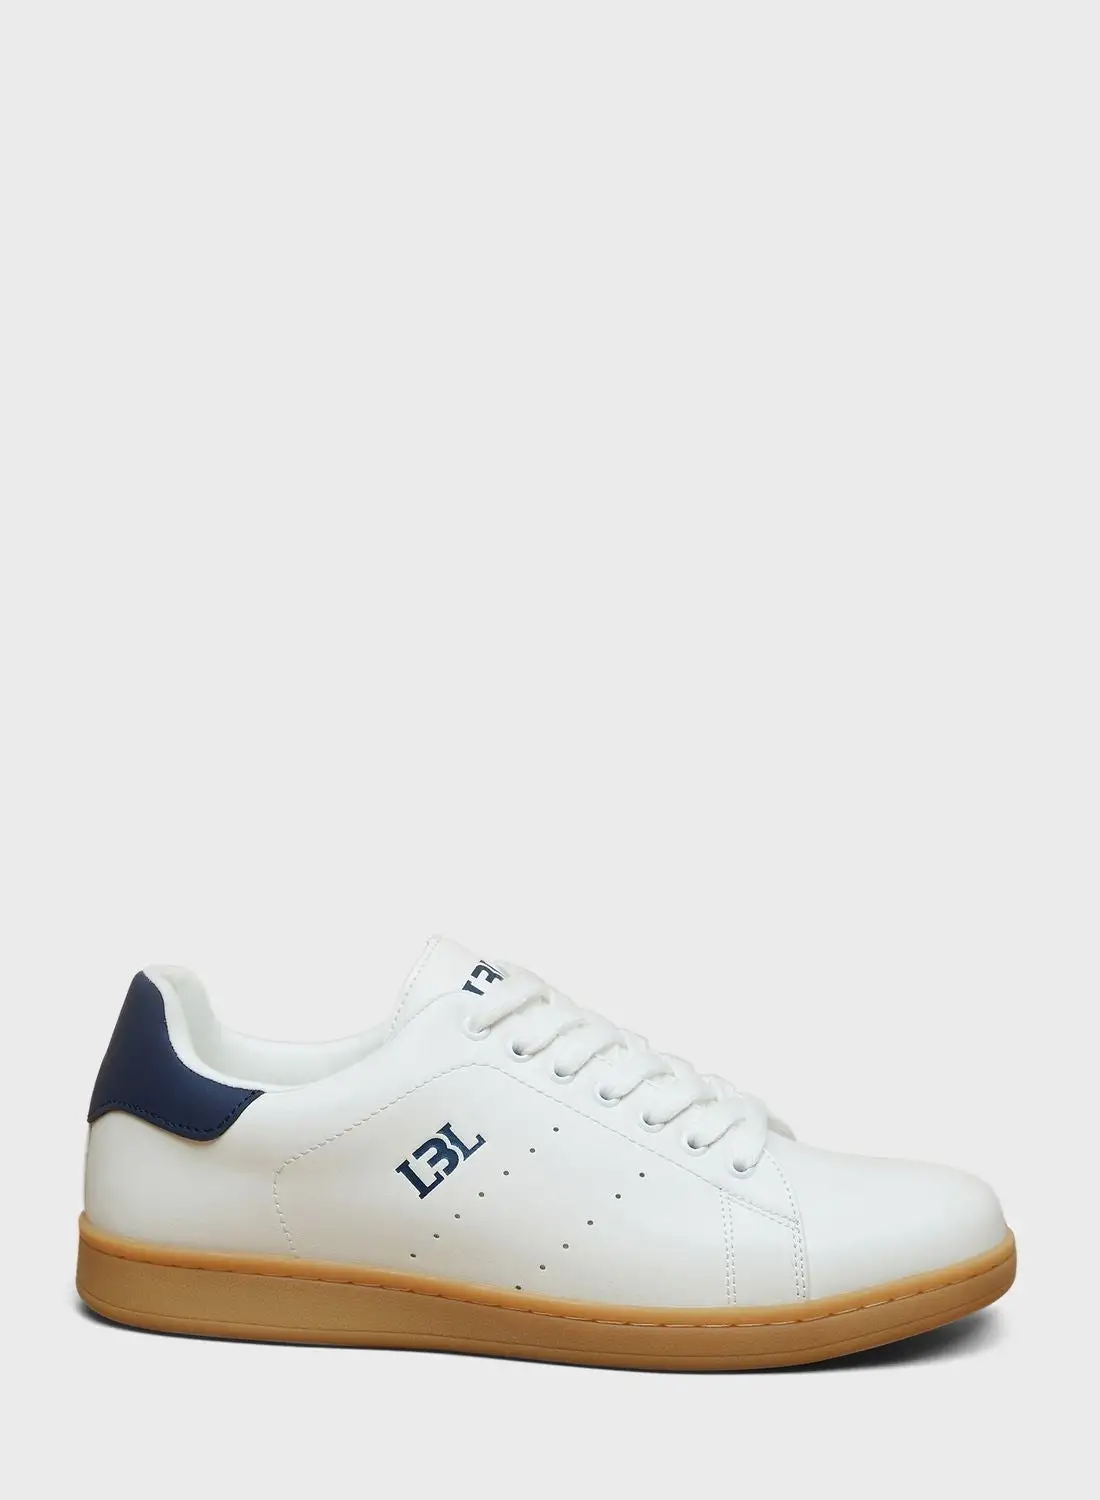 LBL by Shoexpress Lace Up Low Top Sneakers